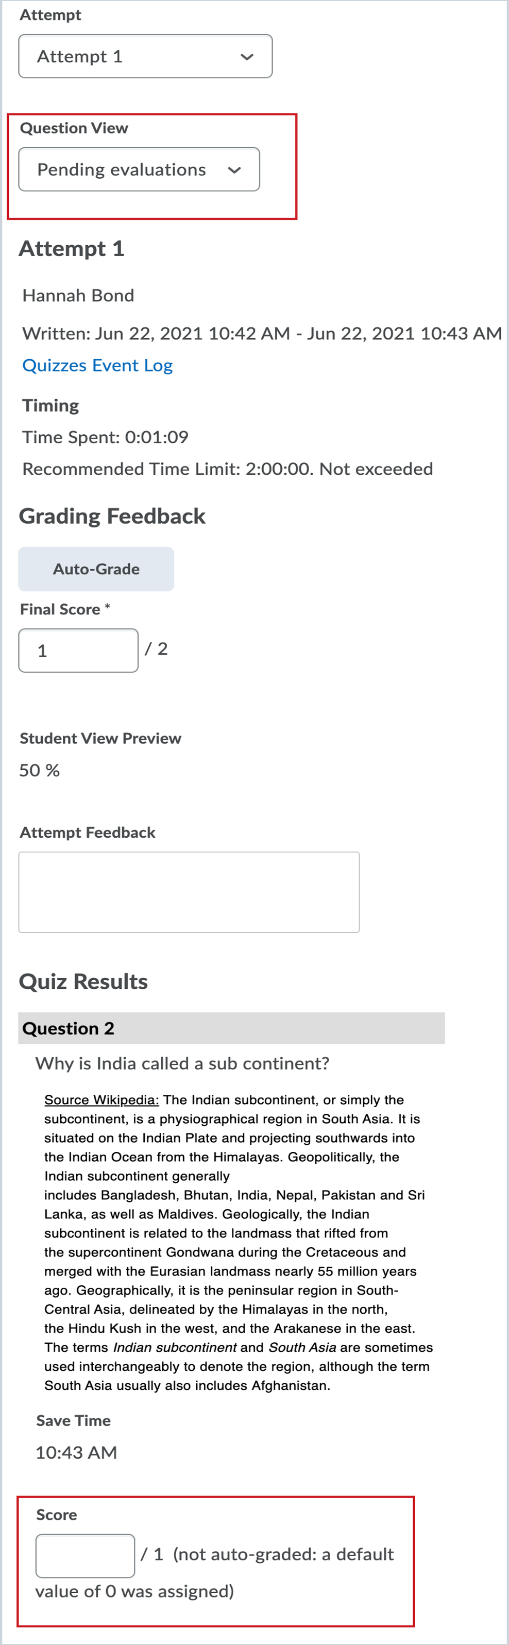 The new Pending Evaluation filter appears in the Question View drop-down menu to easily locate questions requiring manual evaluation by the instructor